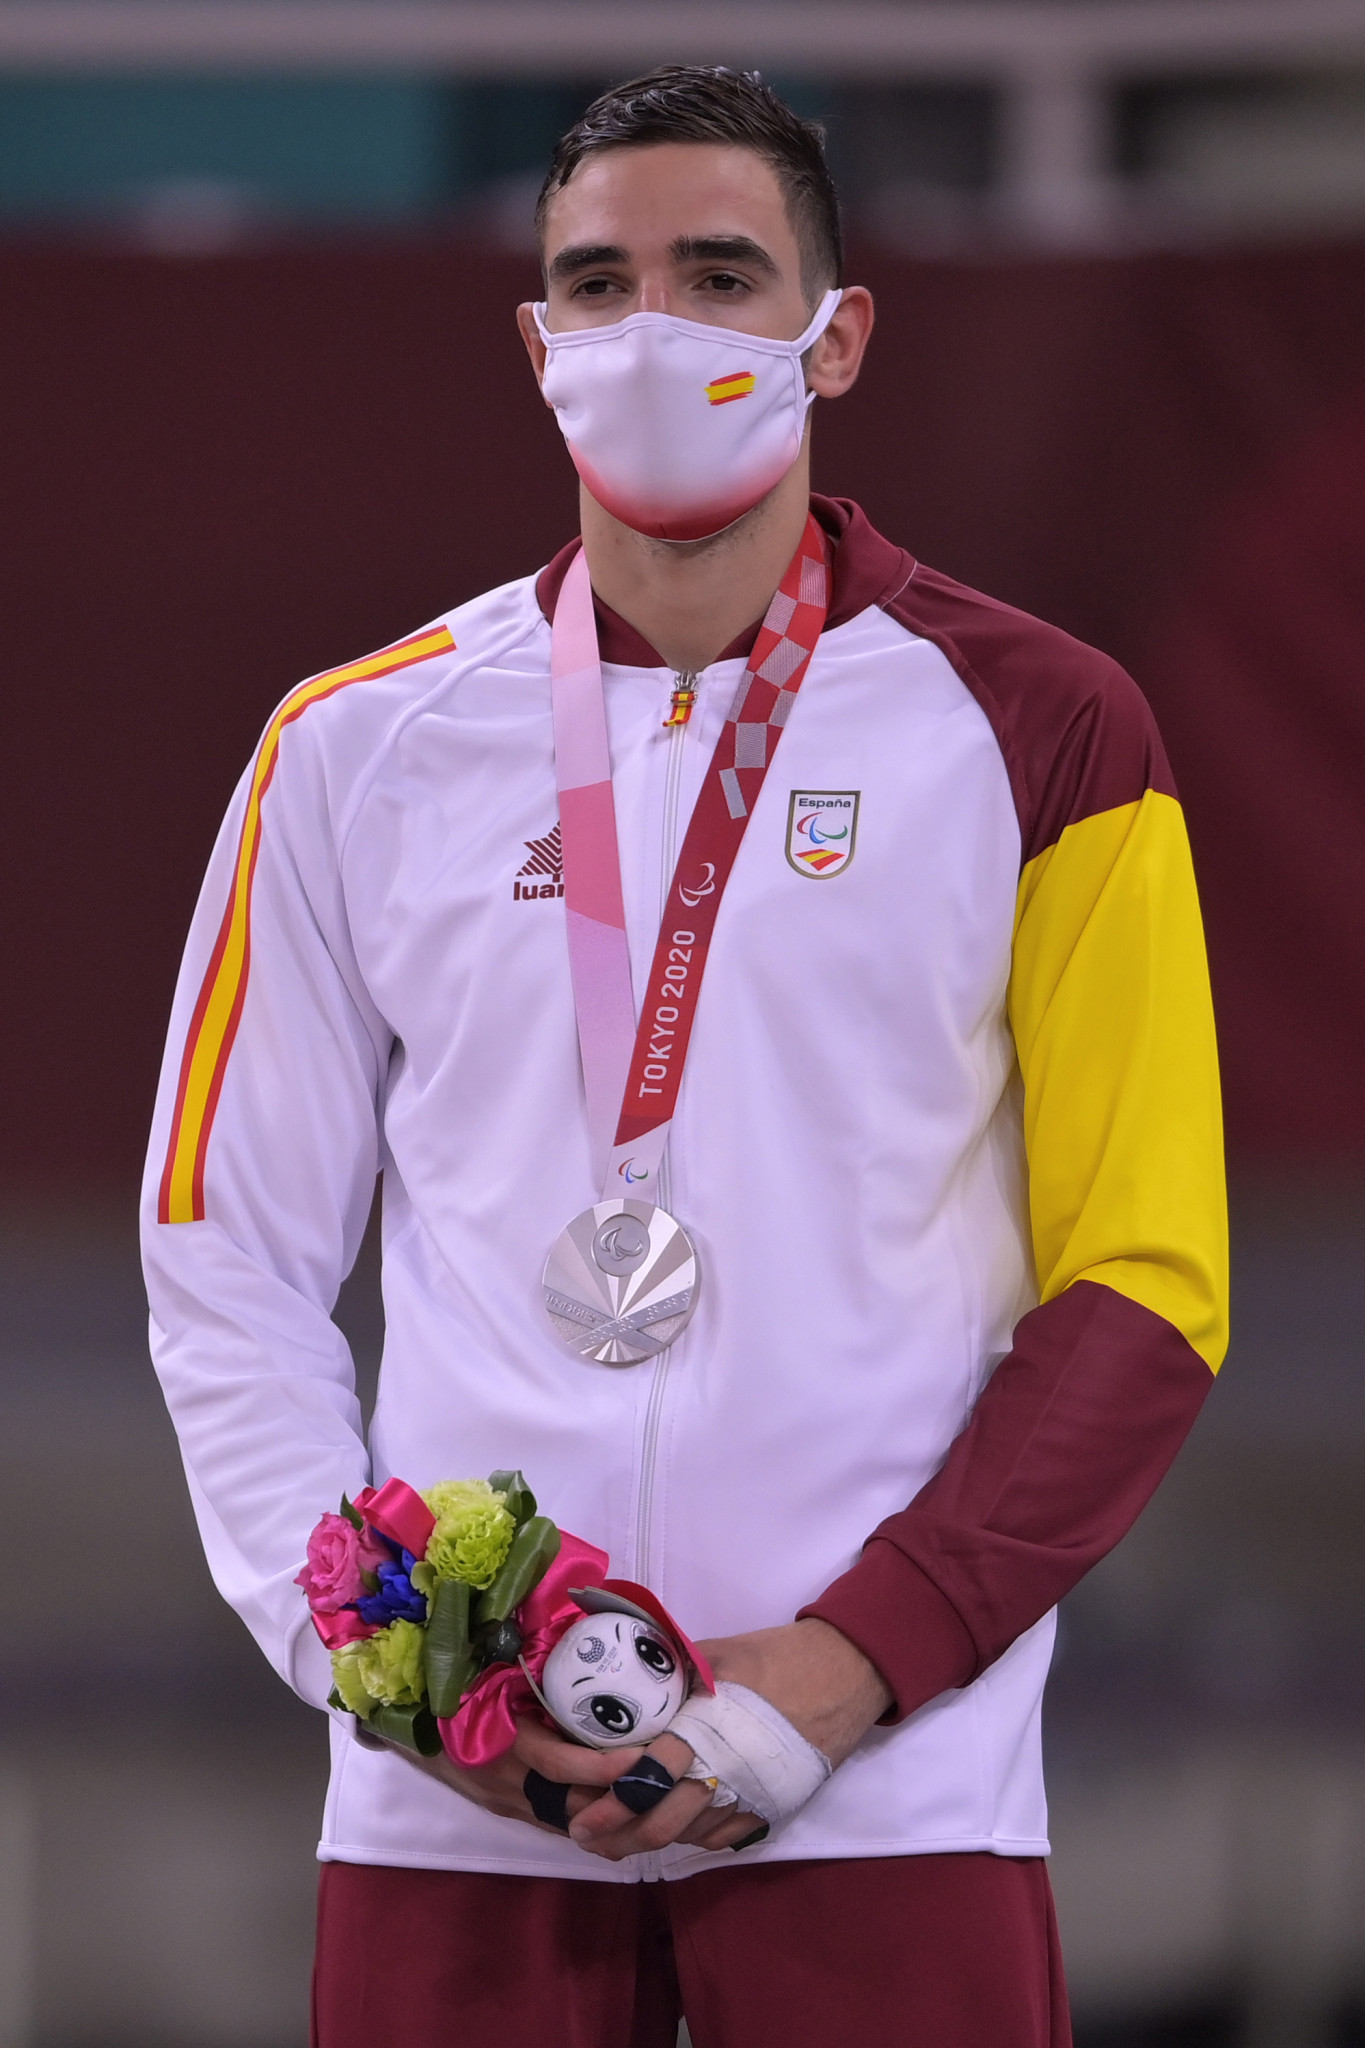 Sérgio Ibáñez won a judo silver medal for Spain at the Tokyo 2020 Paralympics ©Getty Images